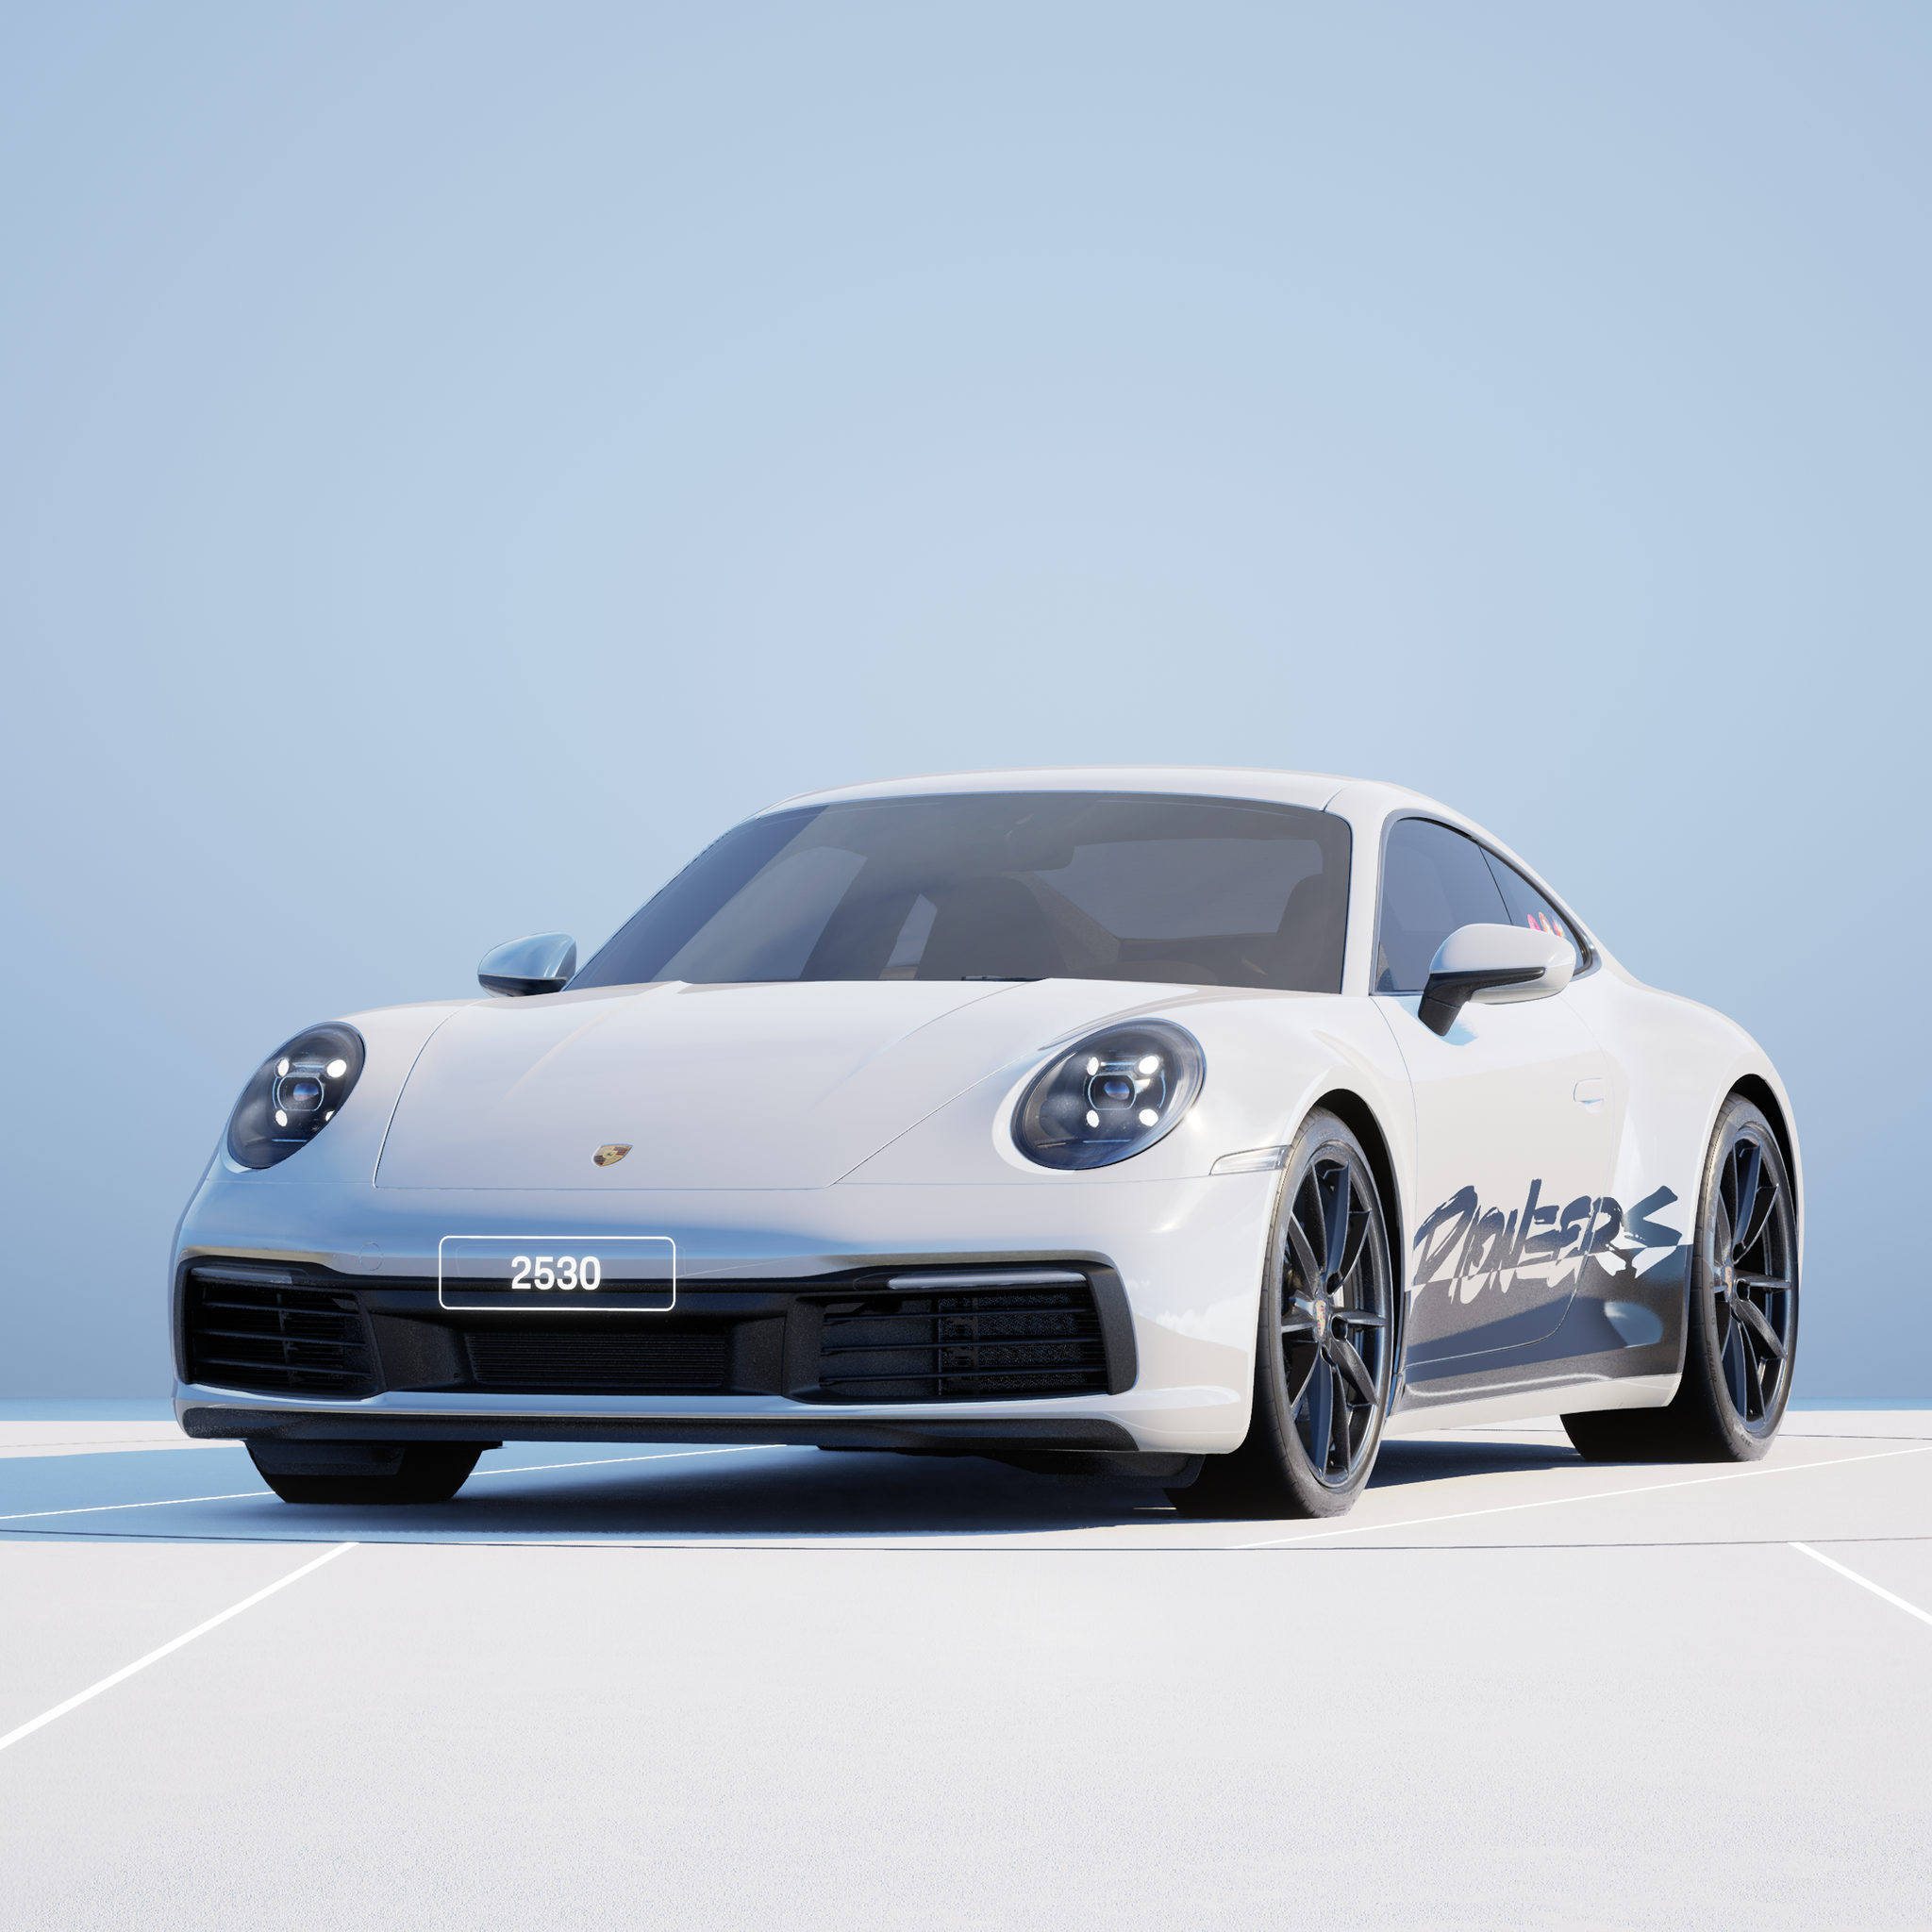 The PORSCHΞ 911 2530 image in phase